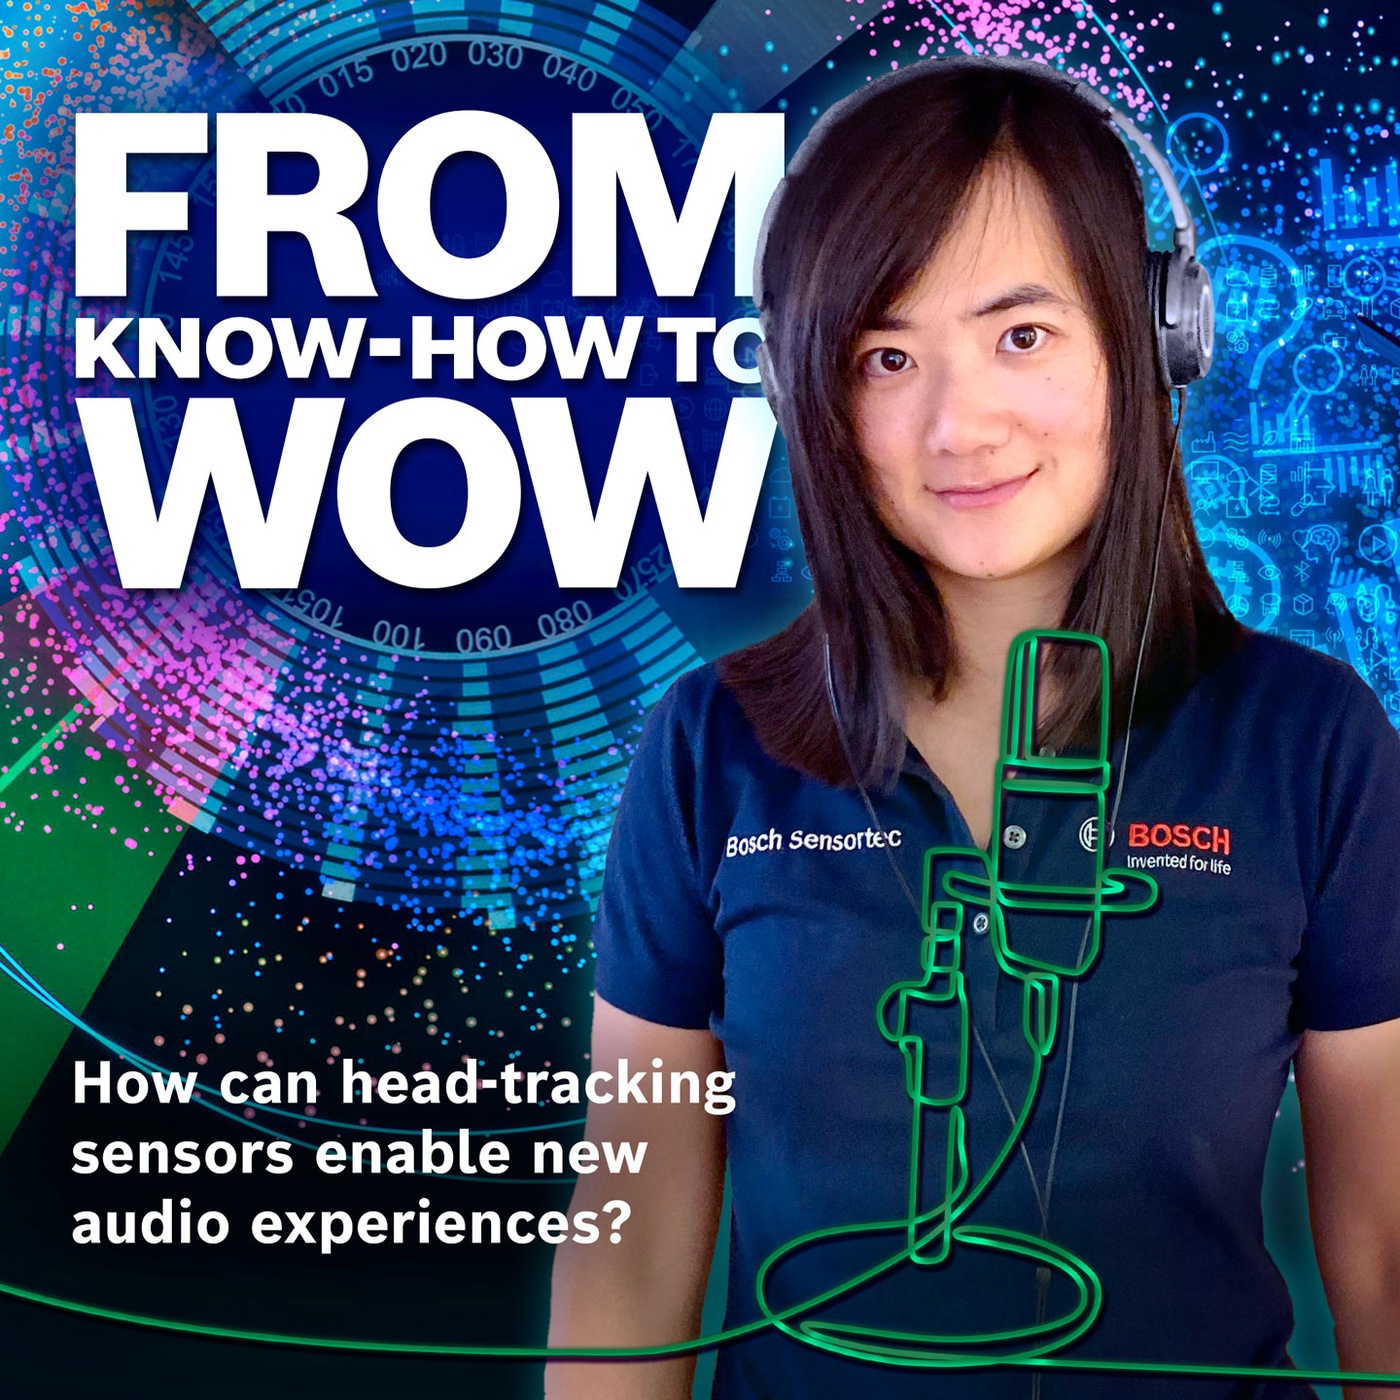 NEW AUDIO EXPERIENCES WITH HEAD-TRACKING SENSORS